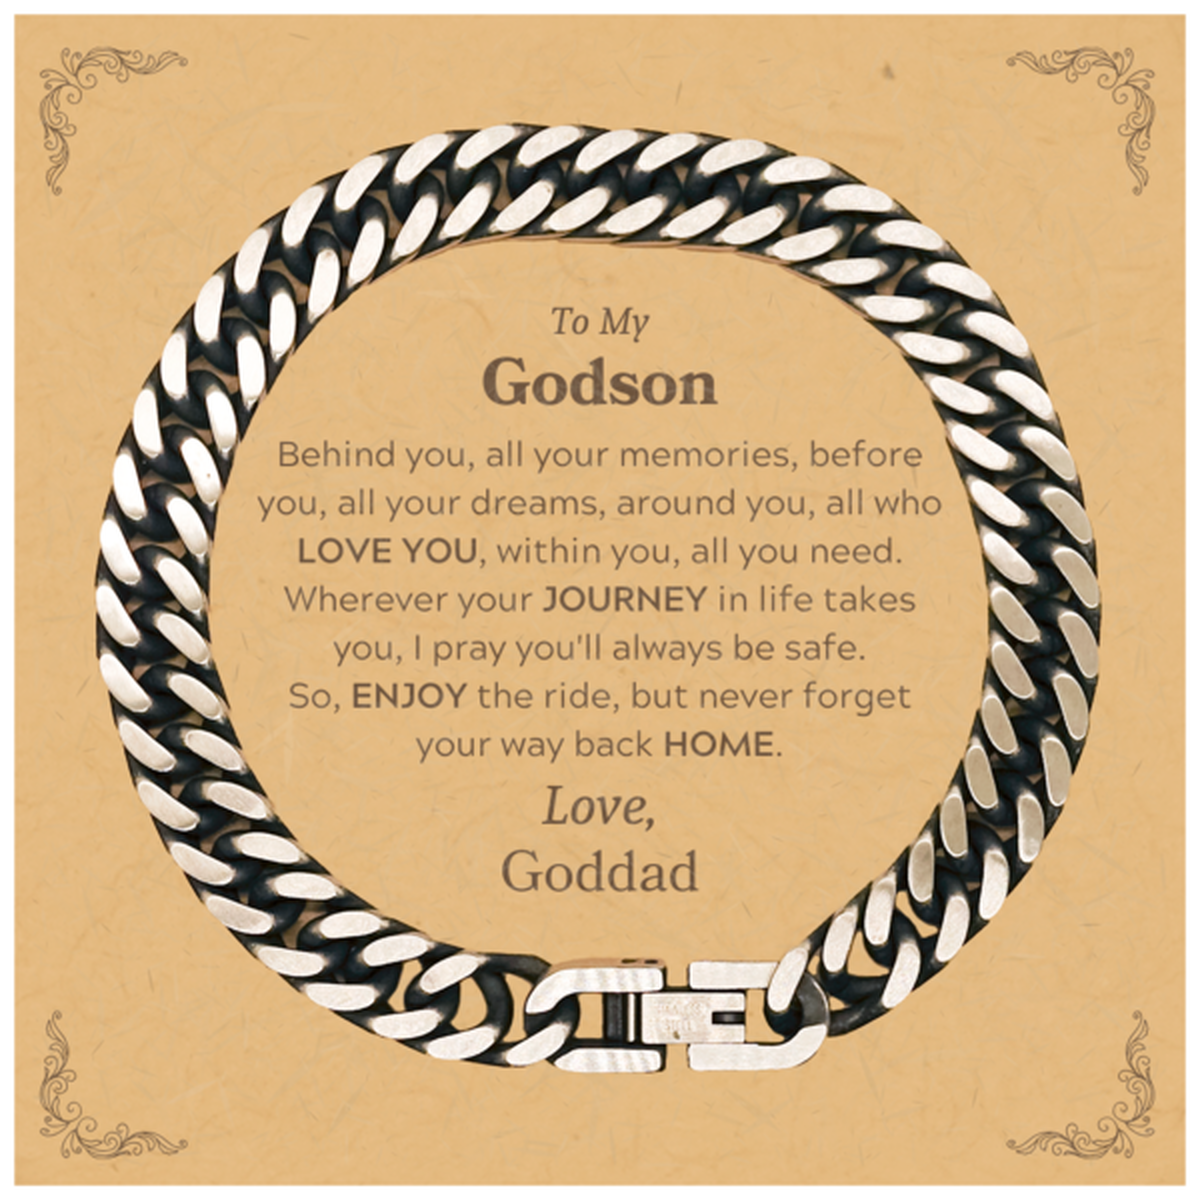 To My Godson Graduation Gifts from Goddad, Godson Cuban Link Chain Bracelet Christmas Birthday Gifts for Godson Behind you, all your memories, before you, all your dreams. Love, Goddad